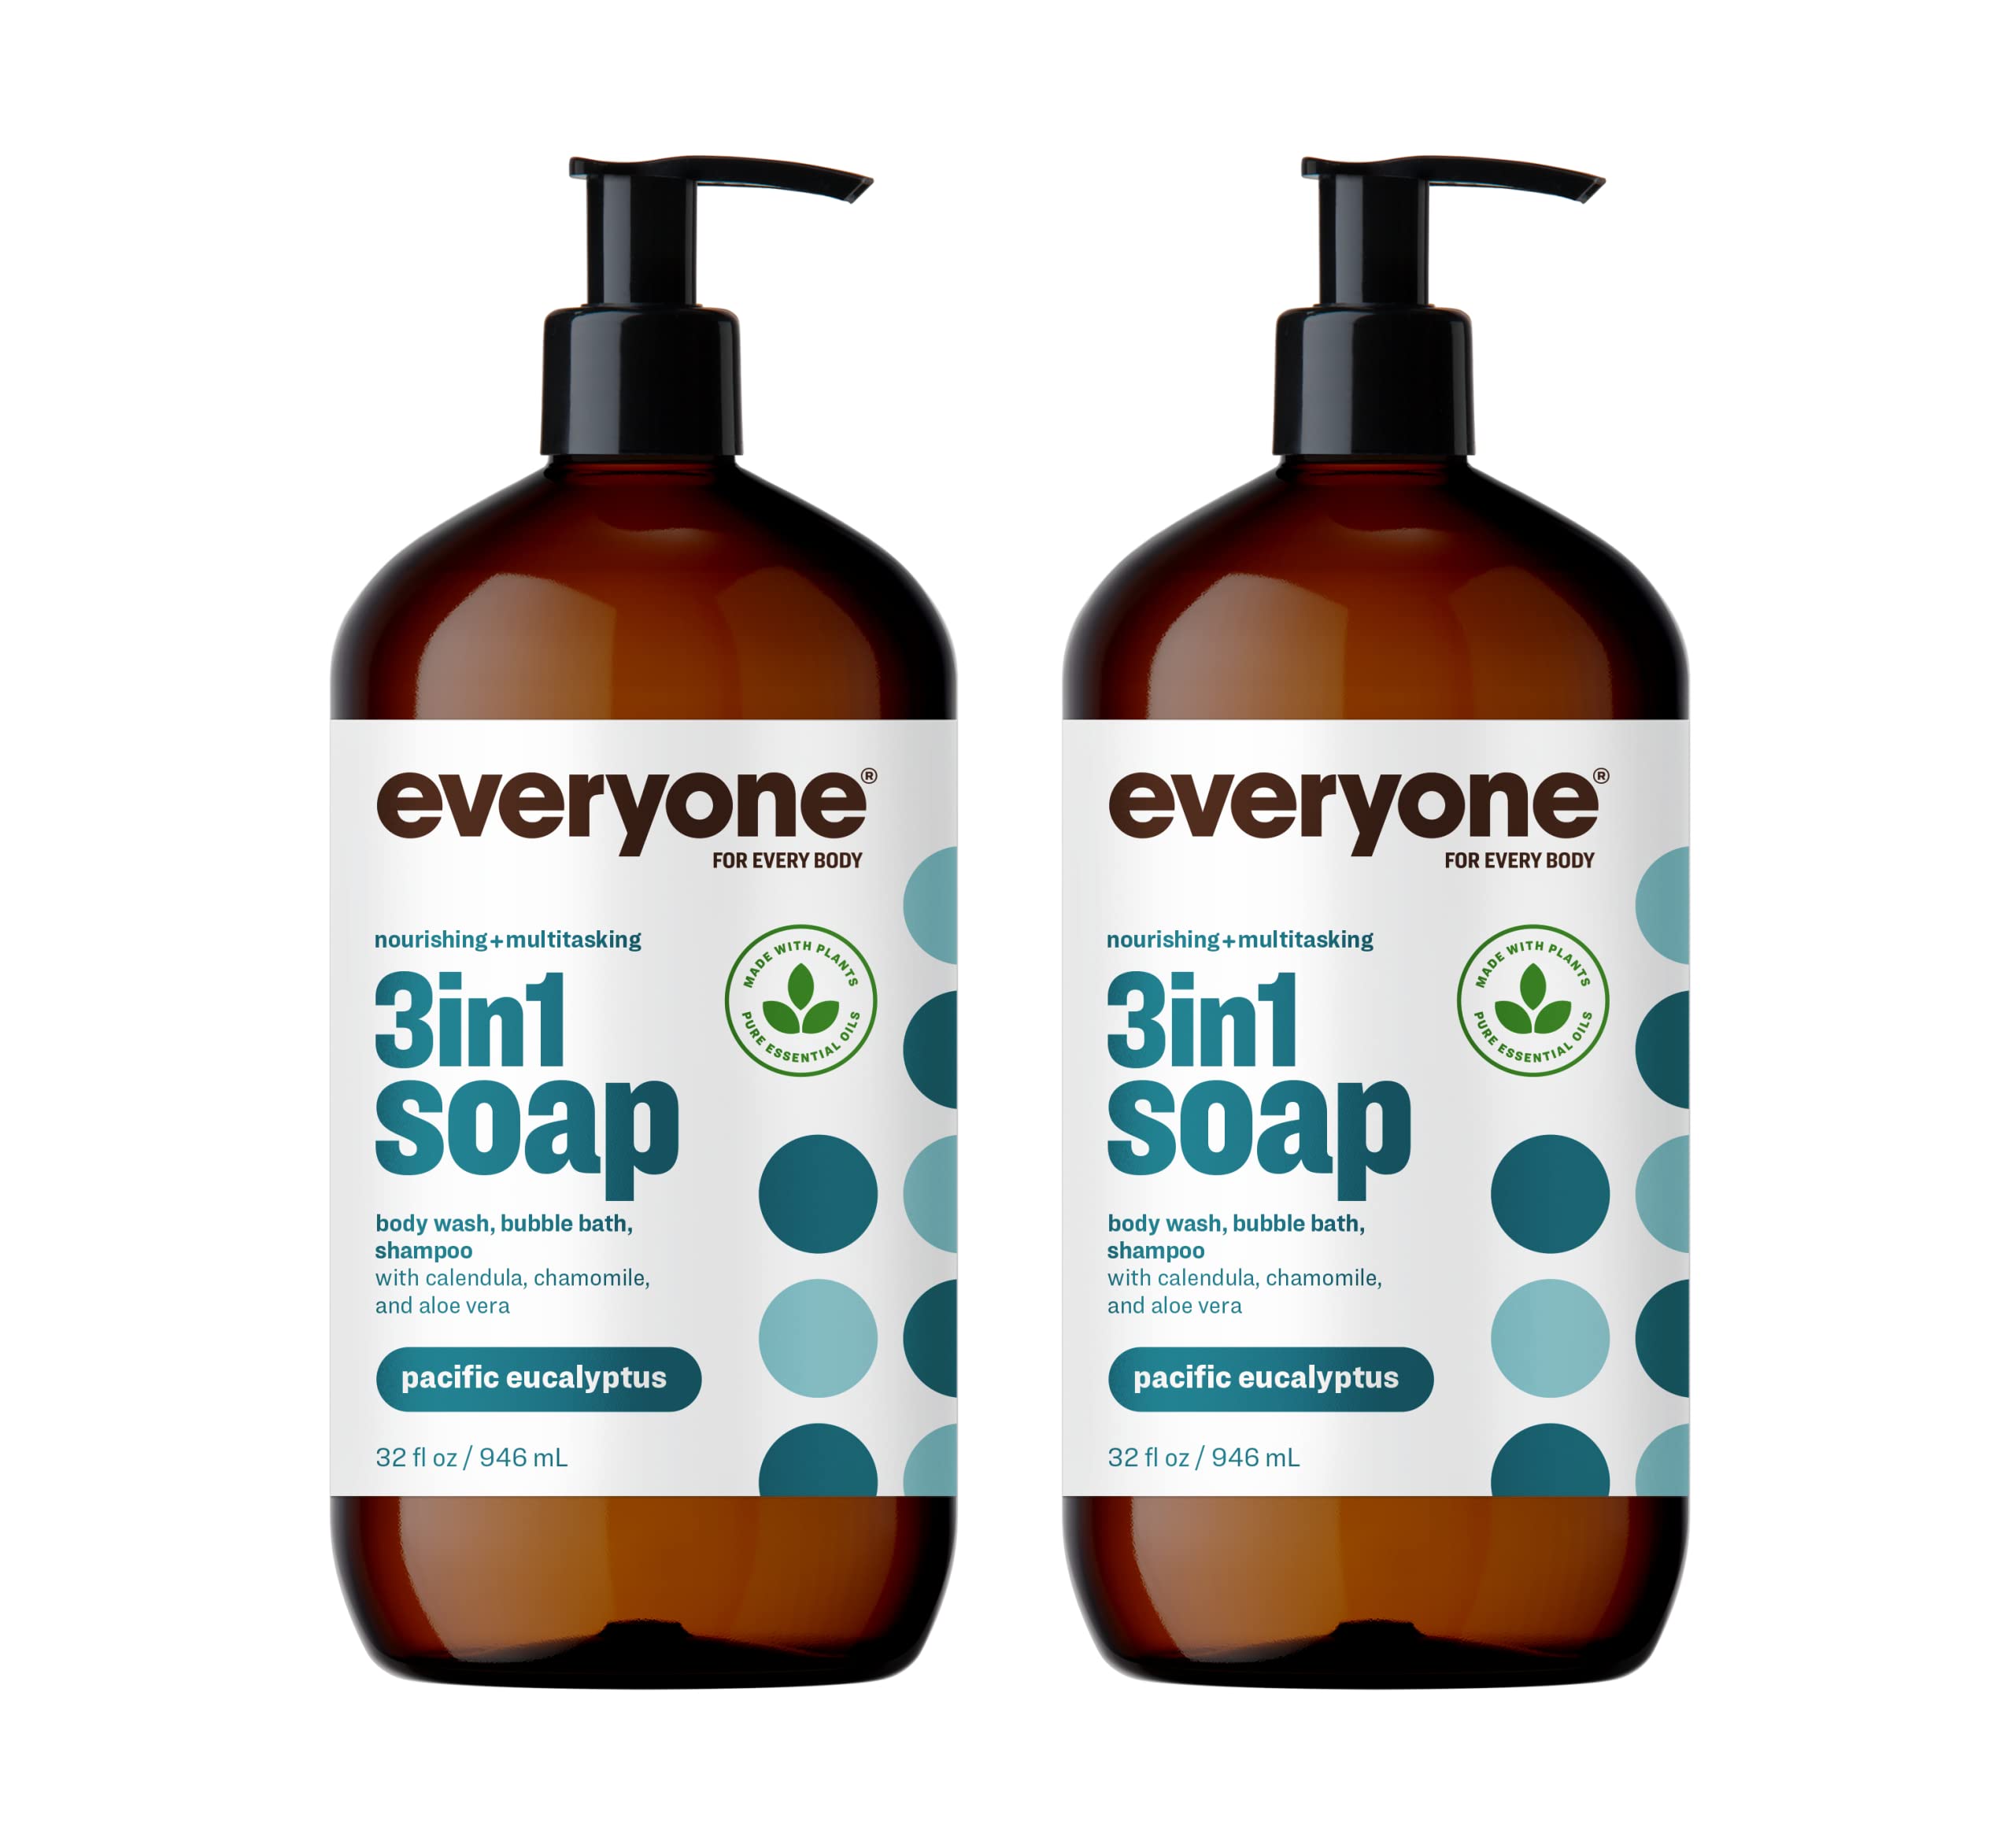 Everyone 3-in-1 Kids Soap, Body Wash, Bubble Bath, Shampoo, 32 Ounce & 3-in-1 Soap, Body Wash, Bubble Bath, Shampoo, 32 Ounce (Pack of 2), Pacific Eucalyptus